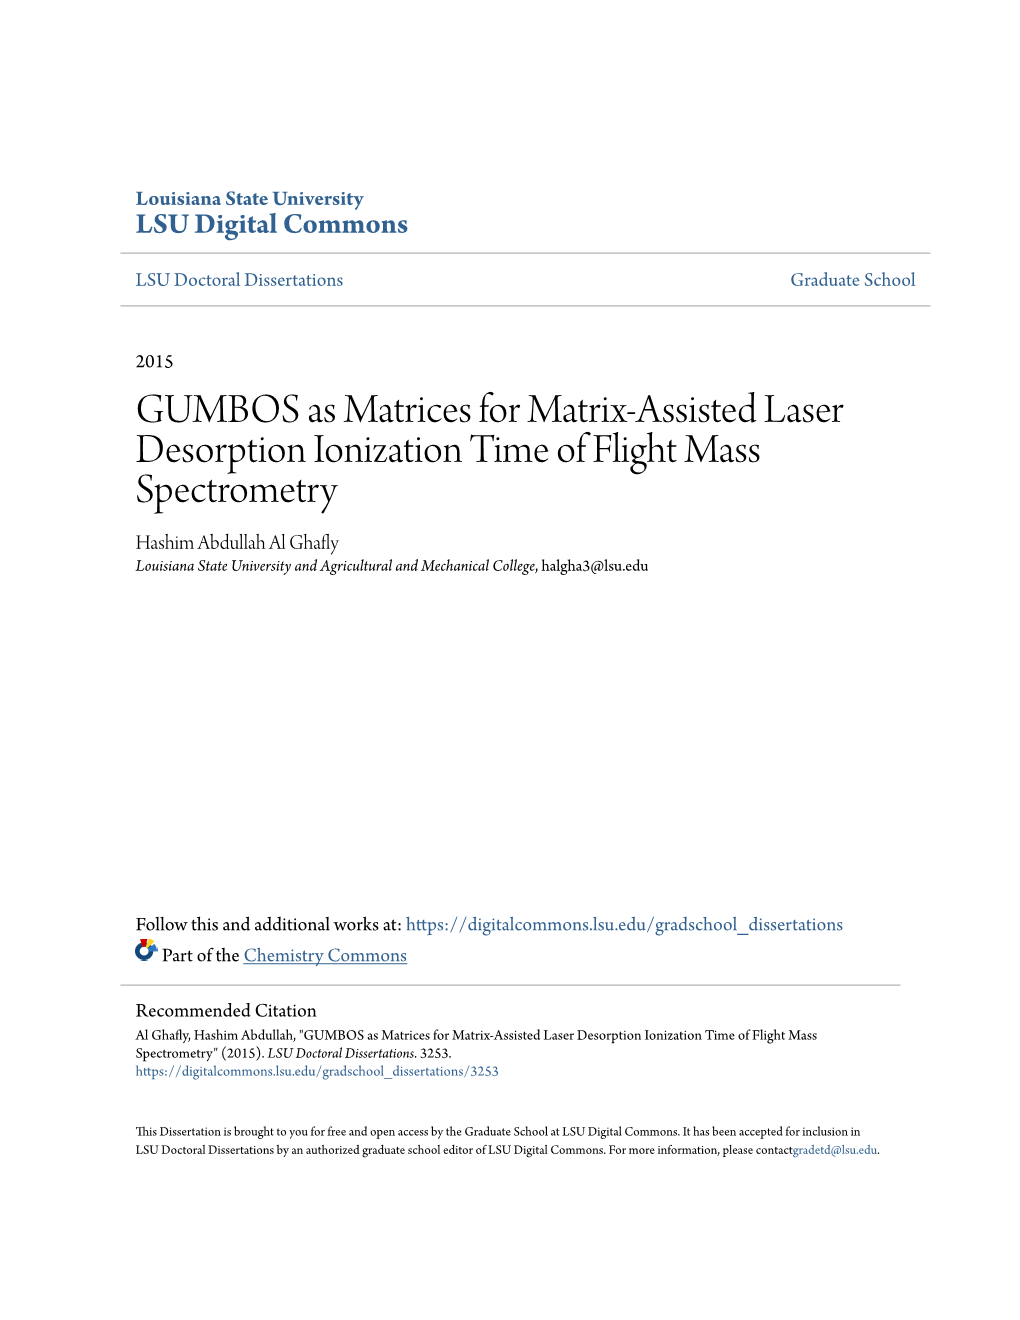 GUMBOS As Matrices for Matrix-Assisted Laser Desorption